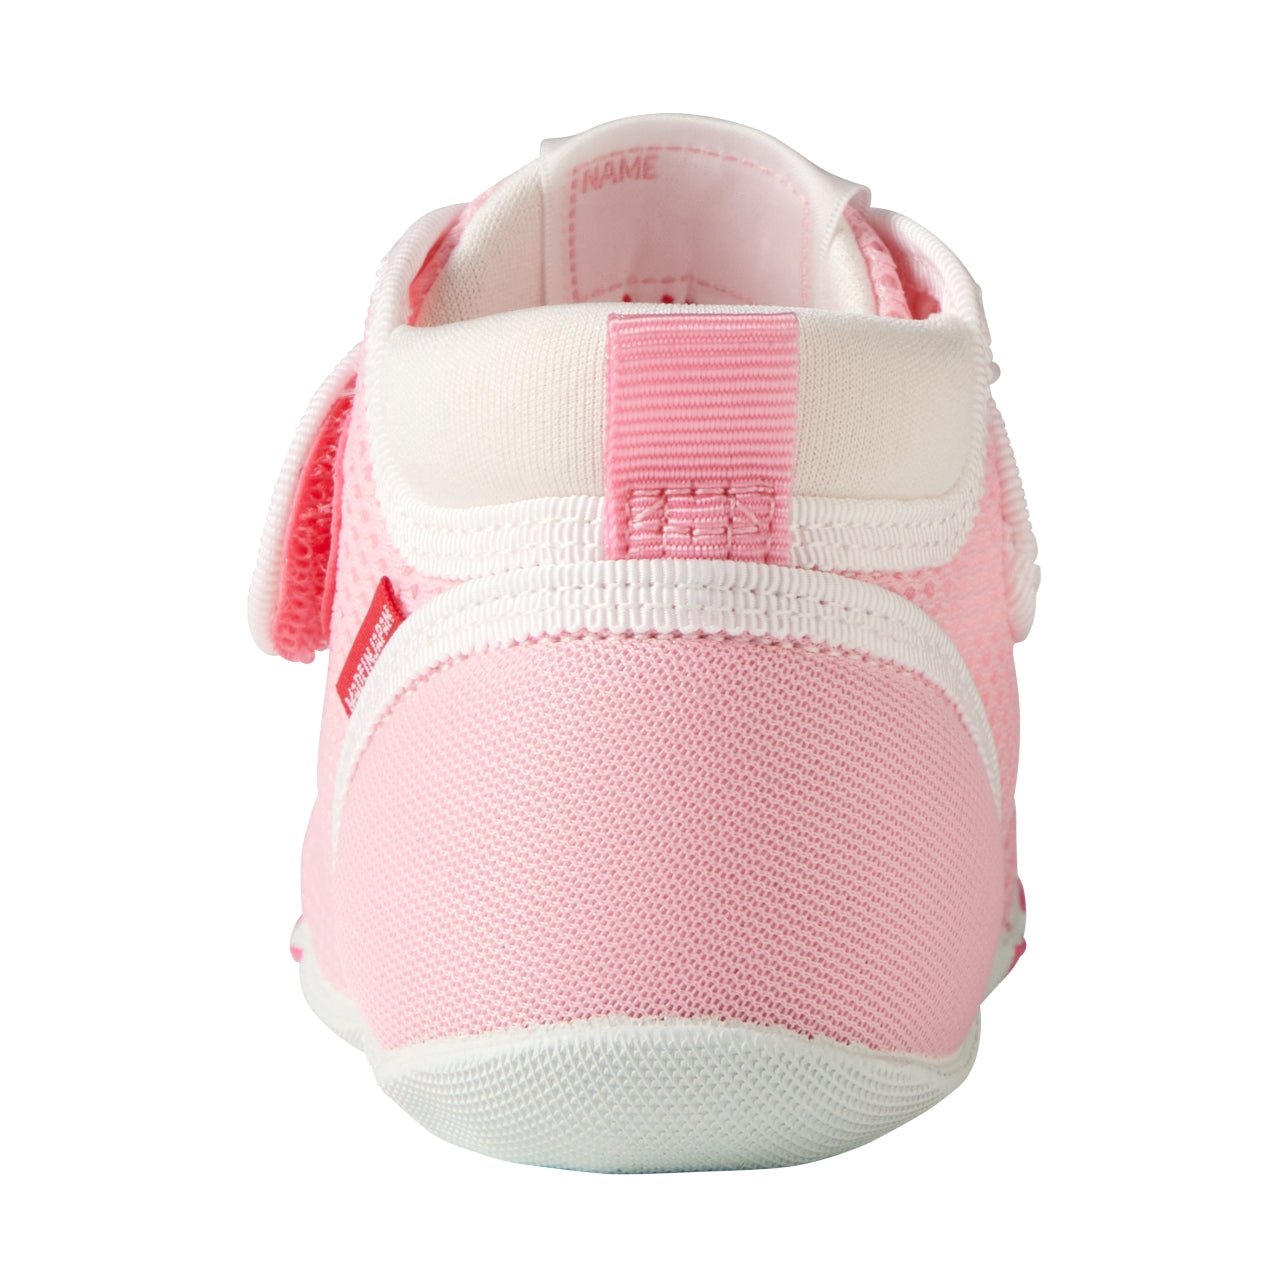 Double Russell Mesh First Walker Shoes - Strawberry Milk